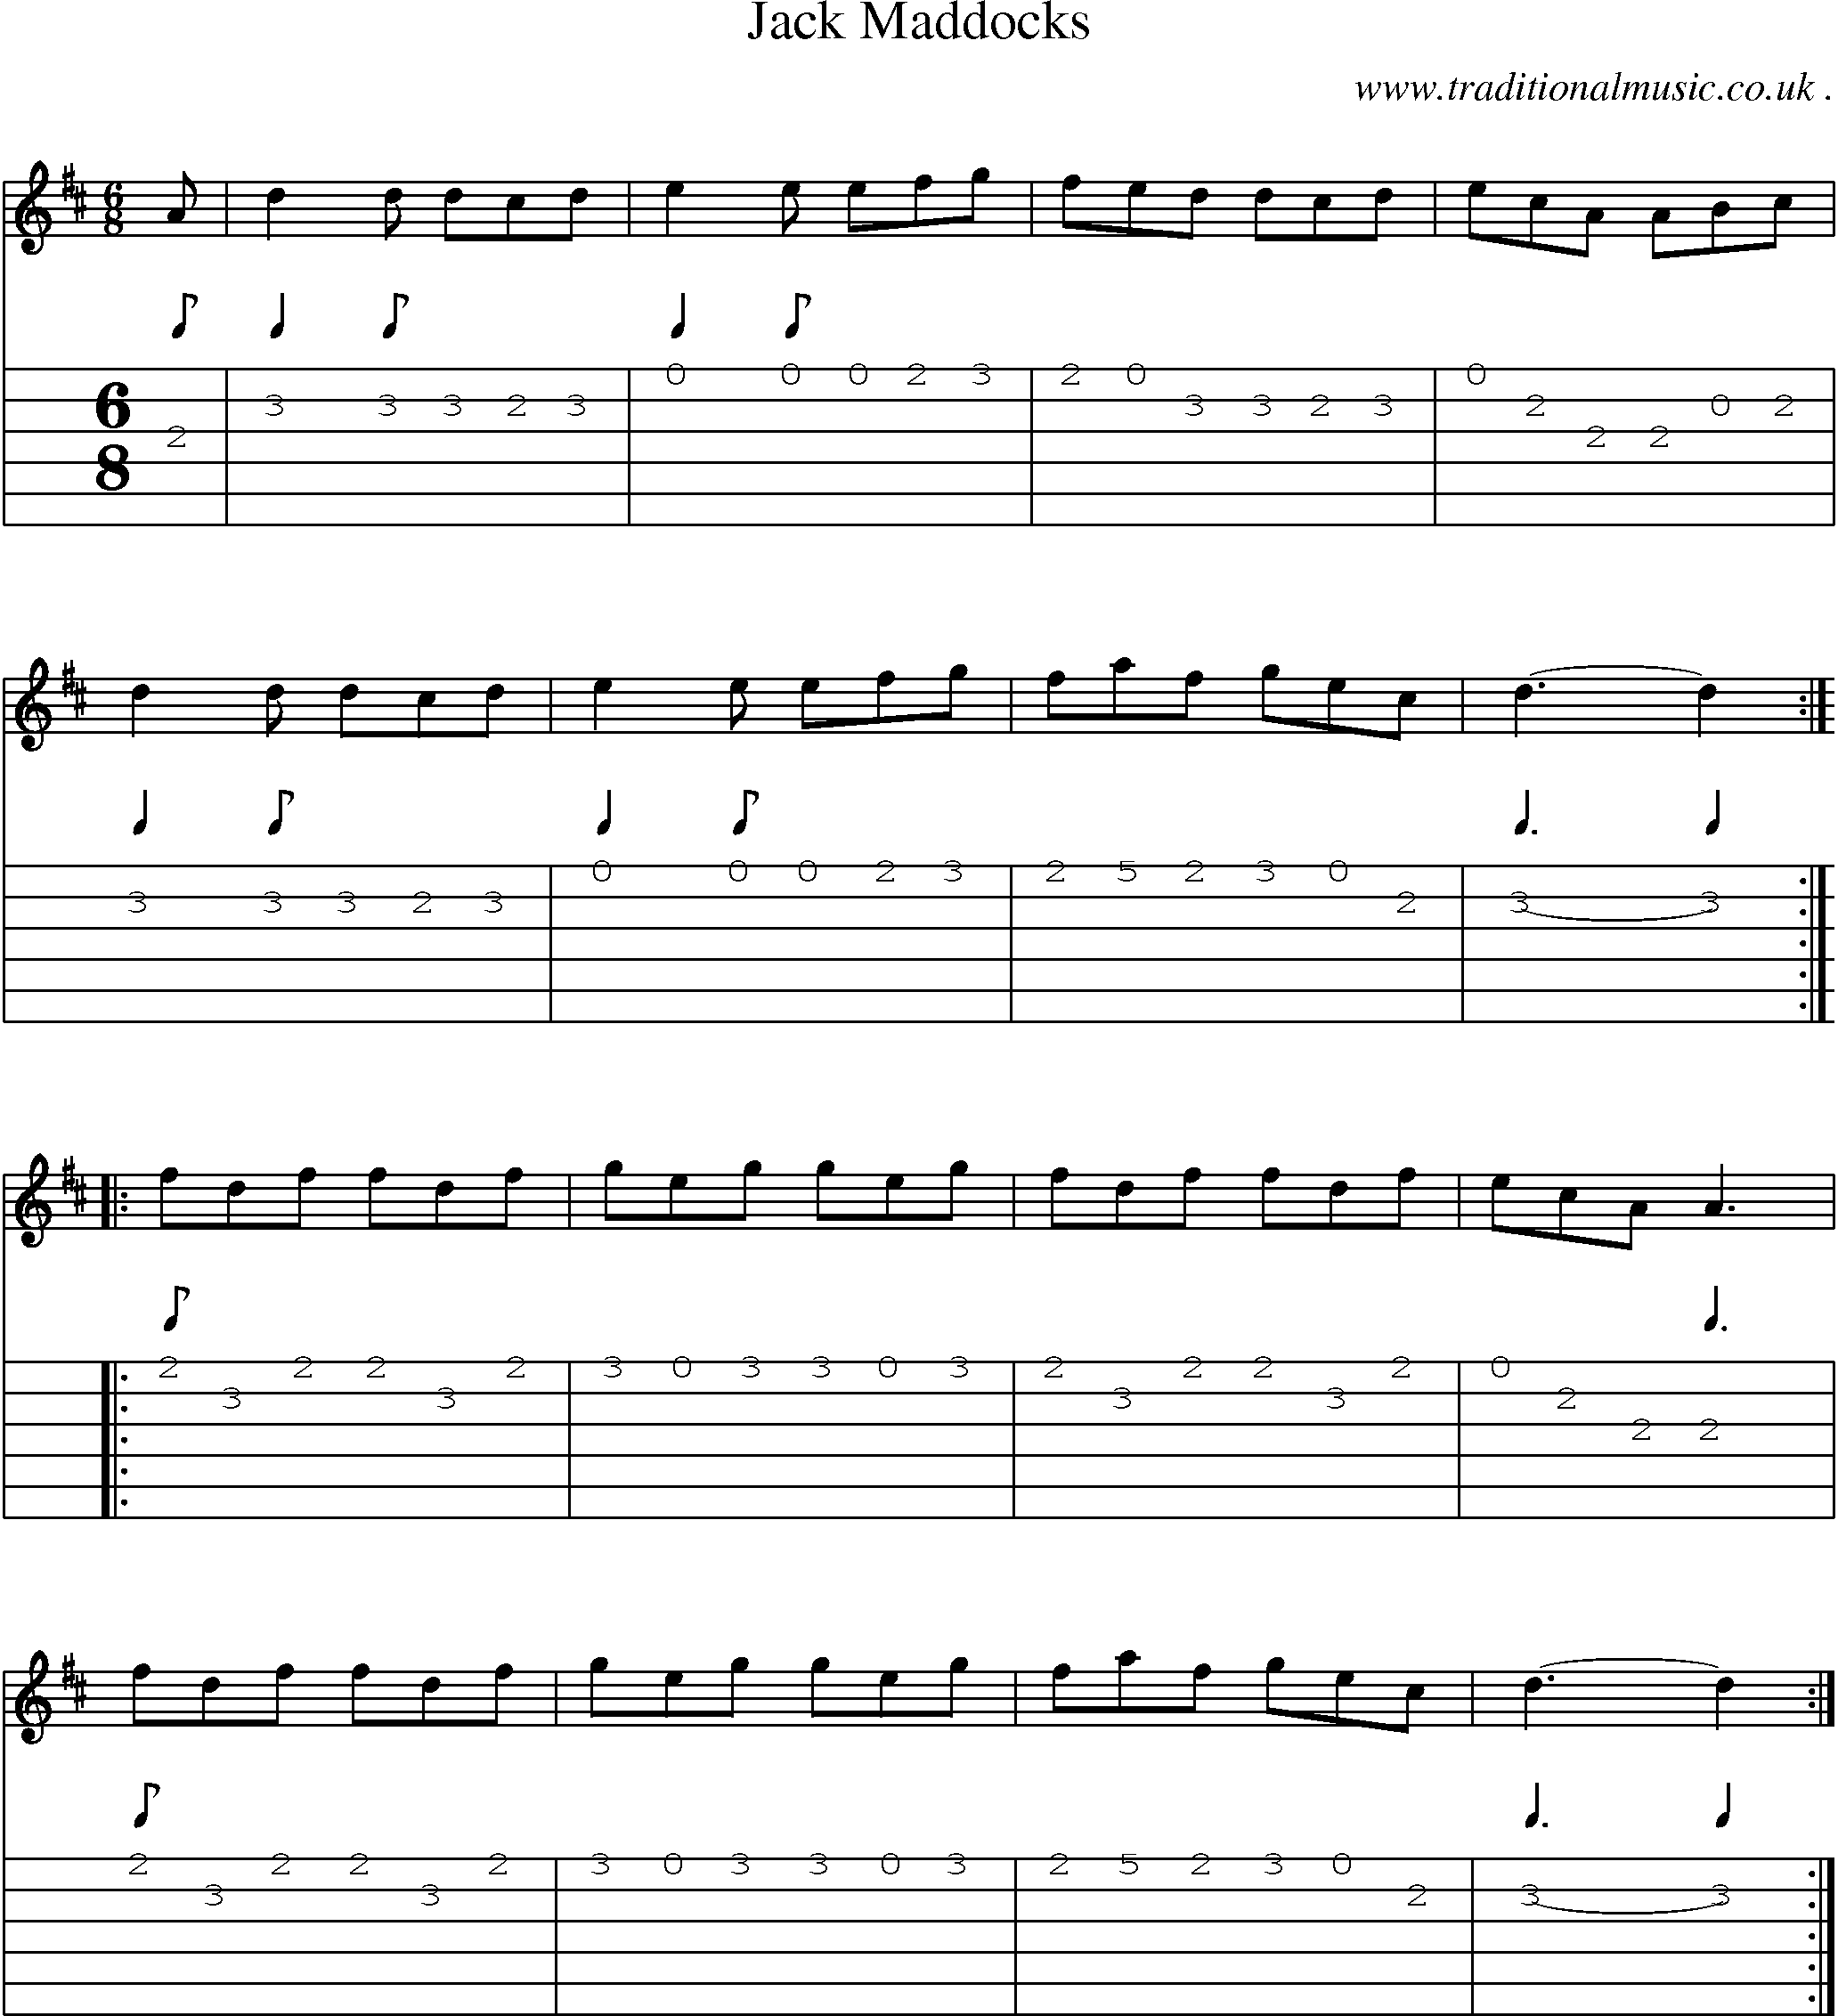 Sheet-Music and Guitar Tabs for Jack Maddocks